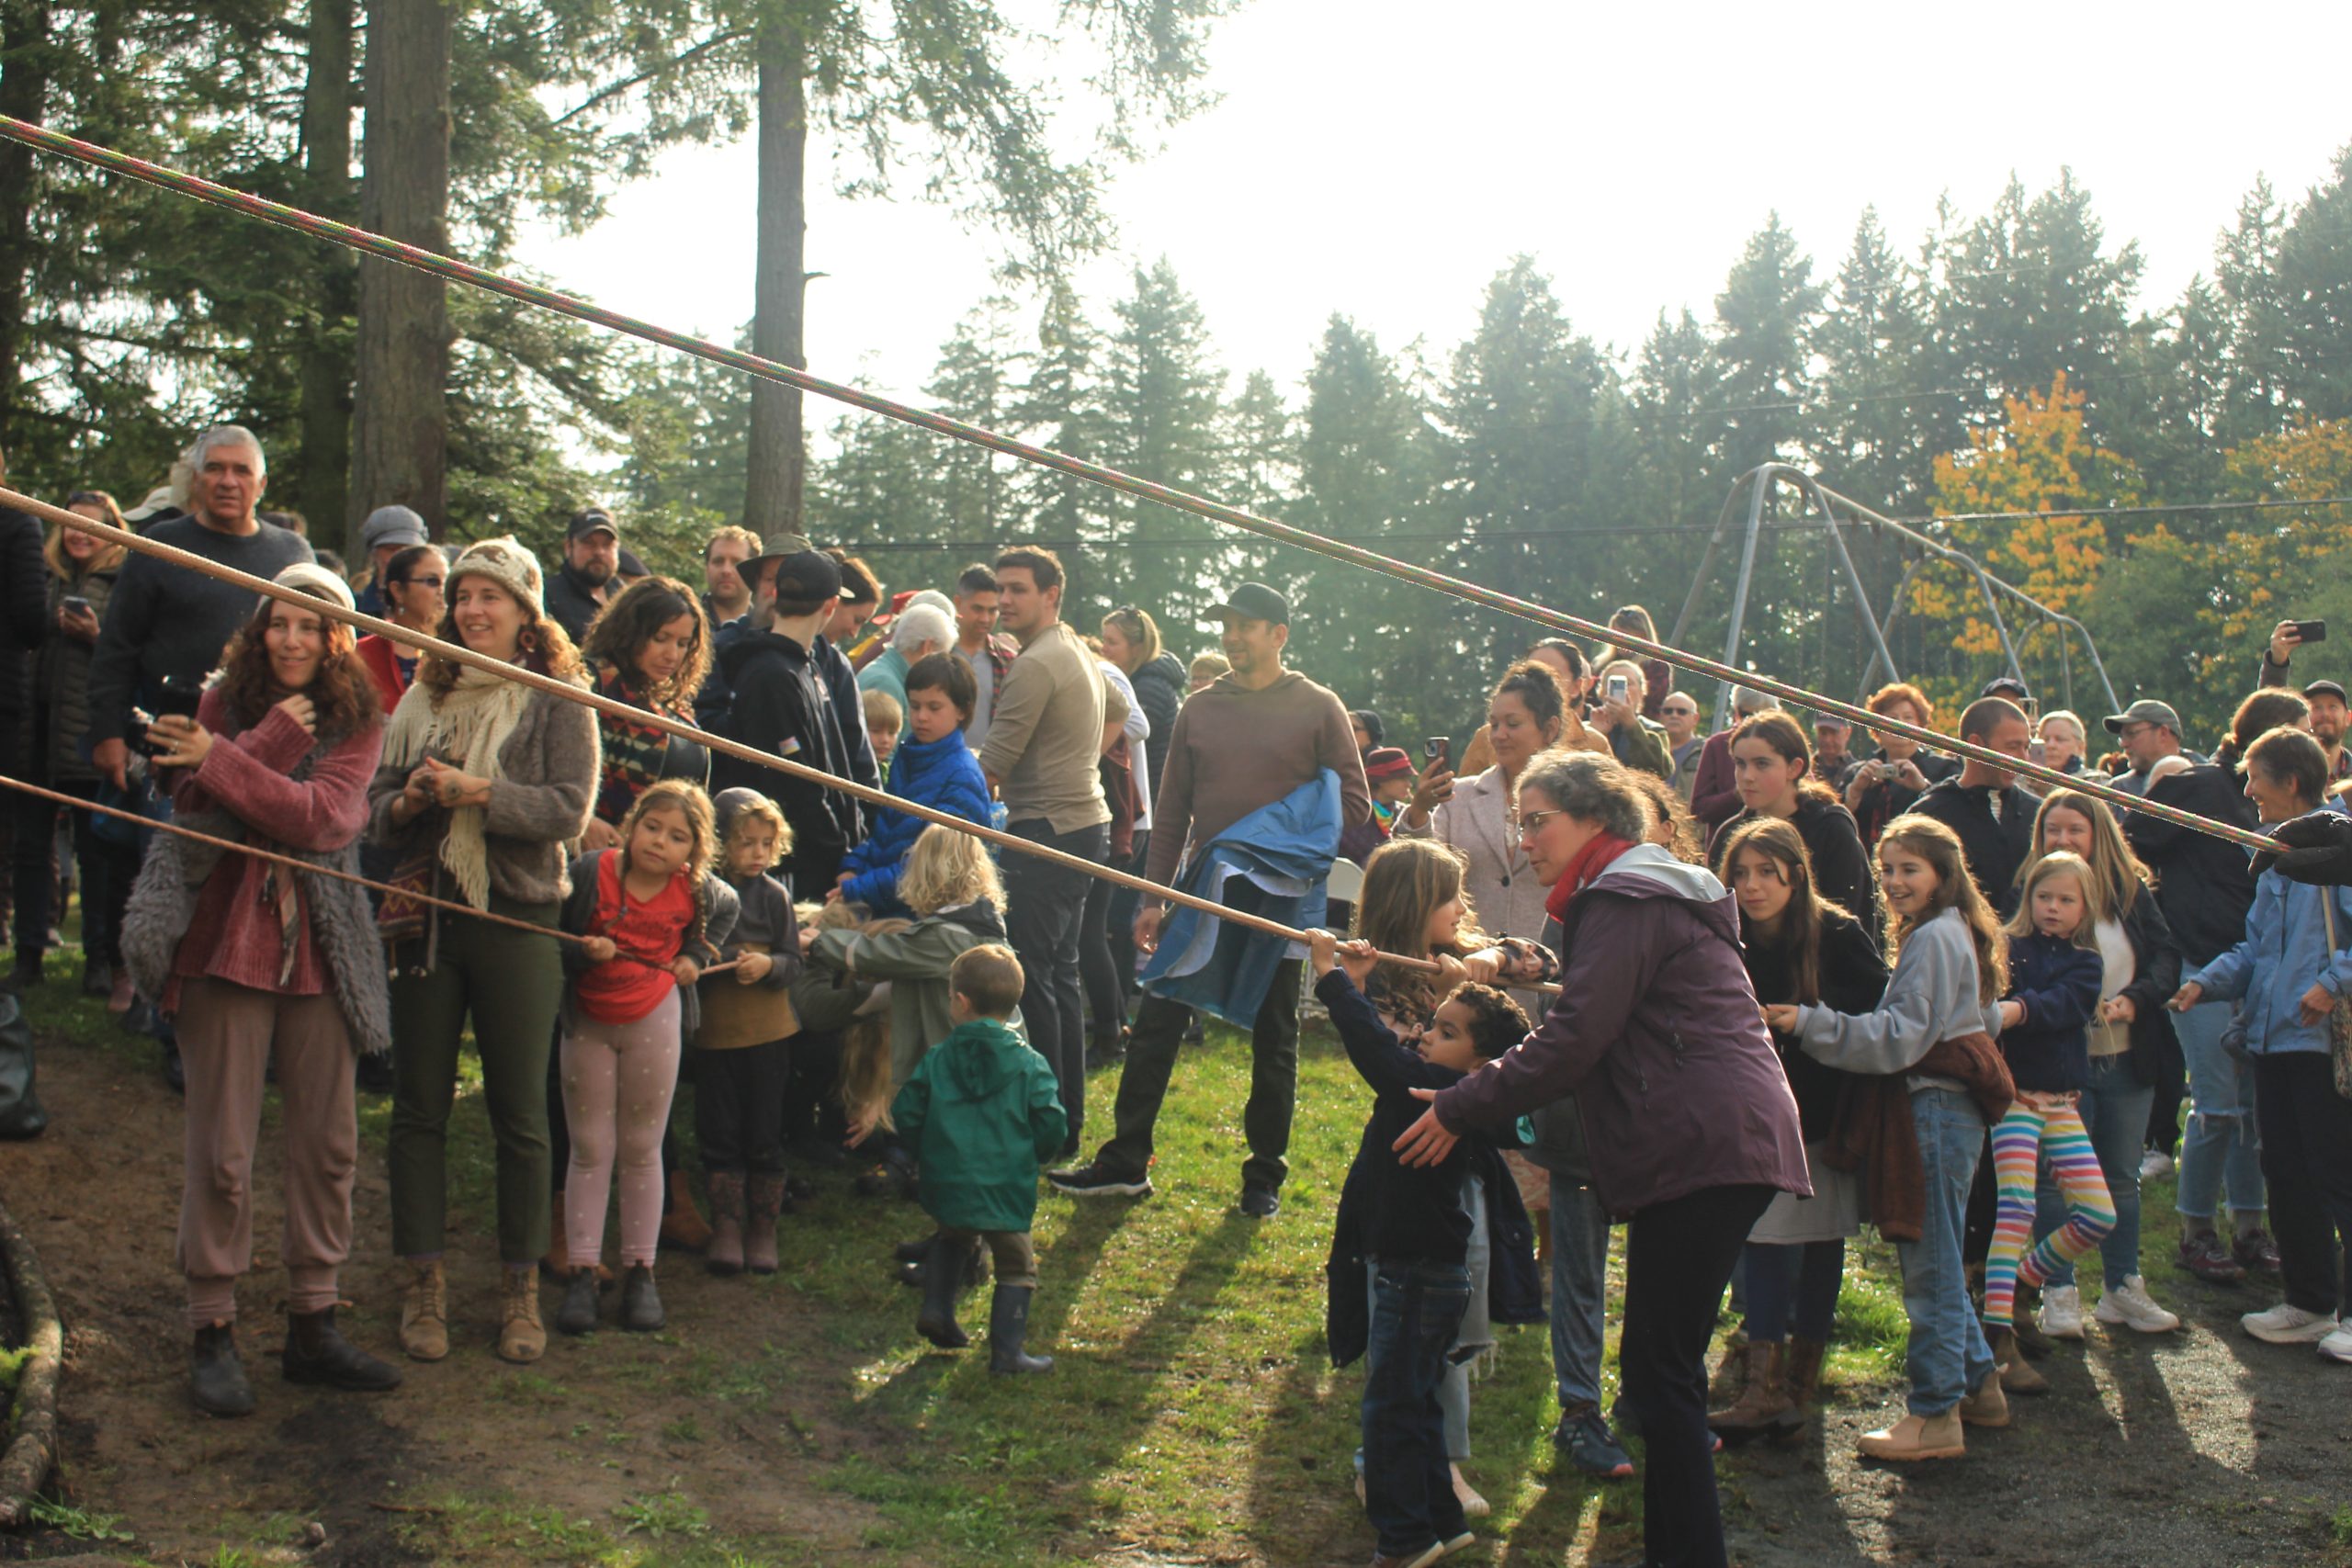 Community members pull on ropes that are running off frame to the left of the photo.